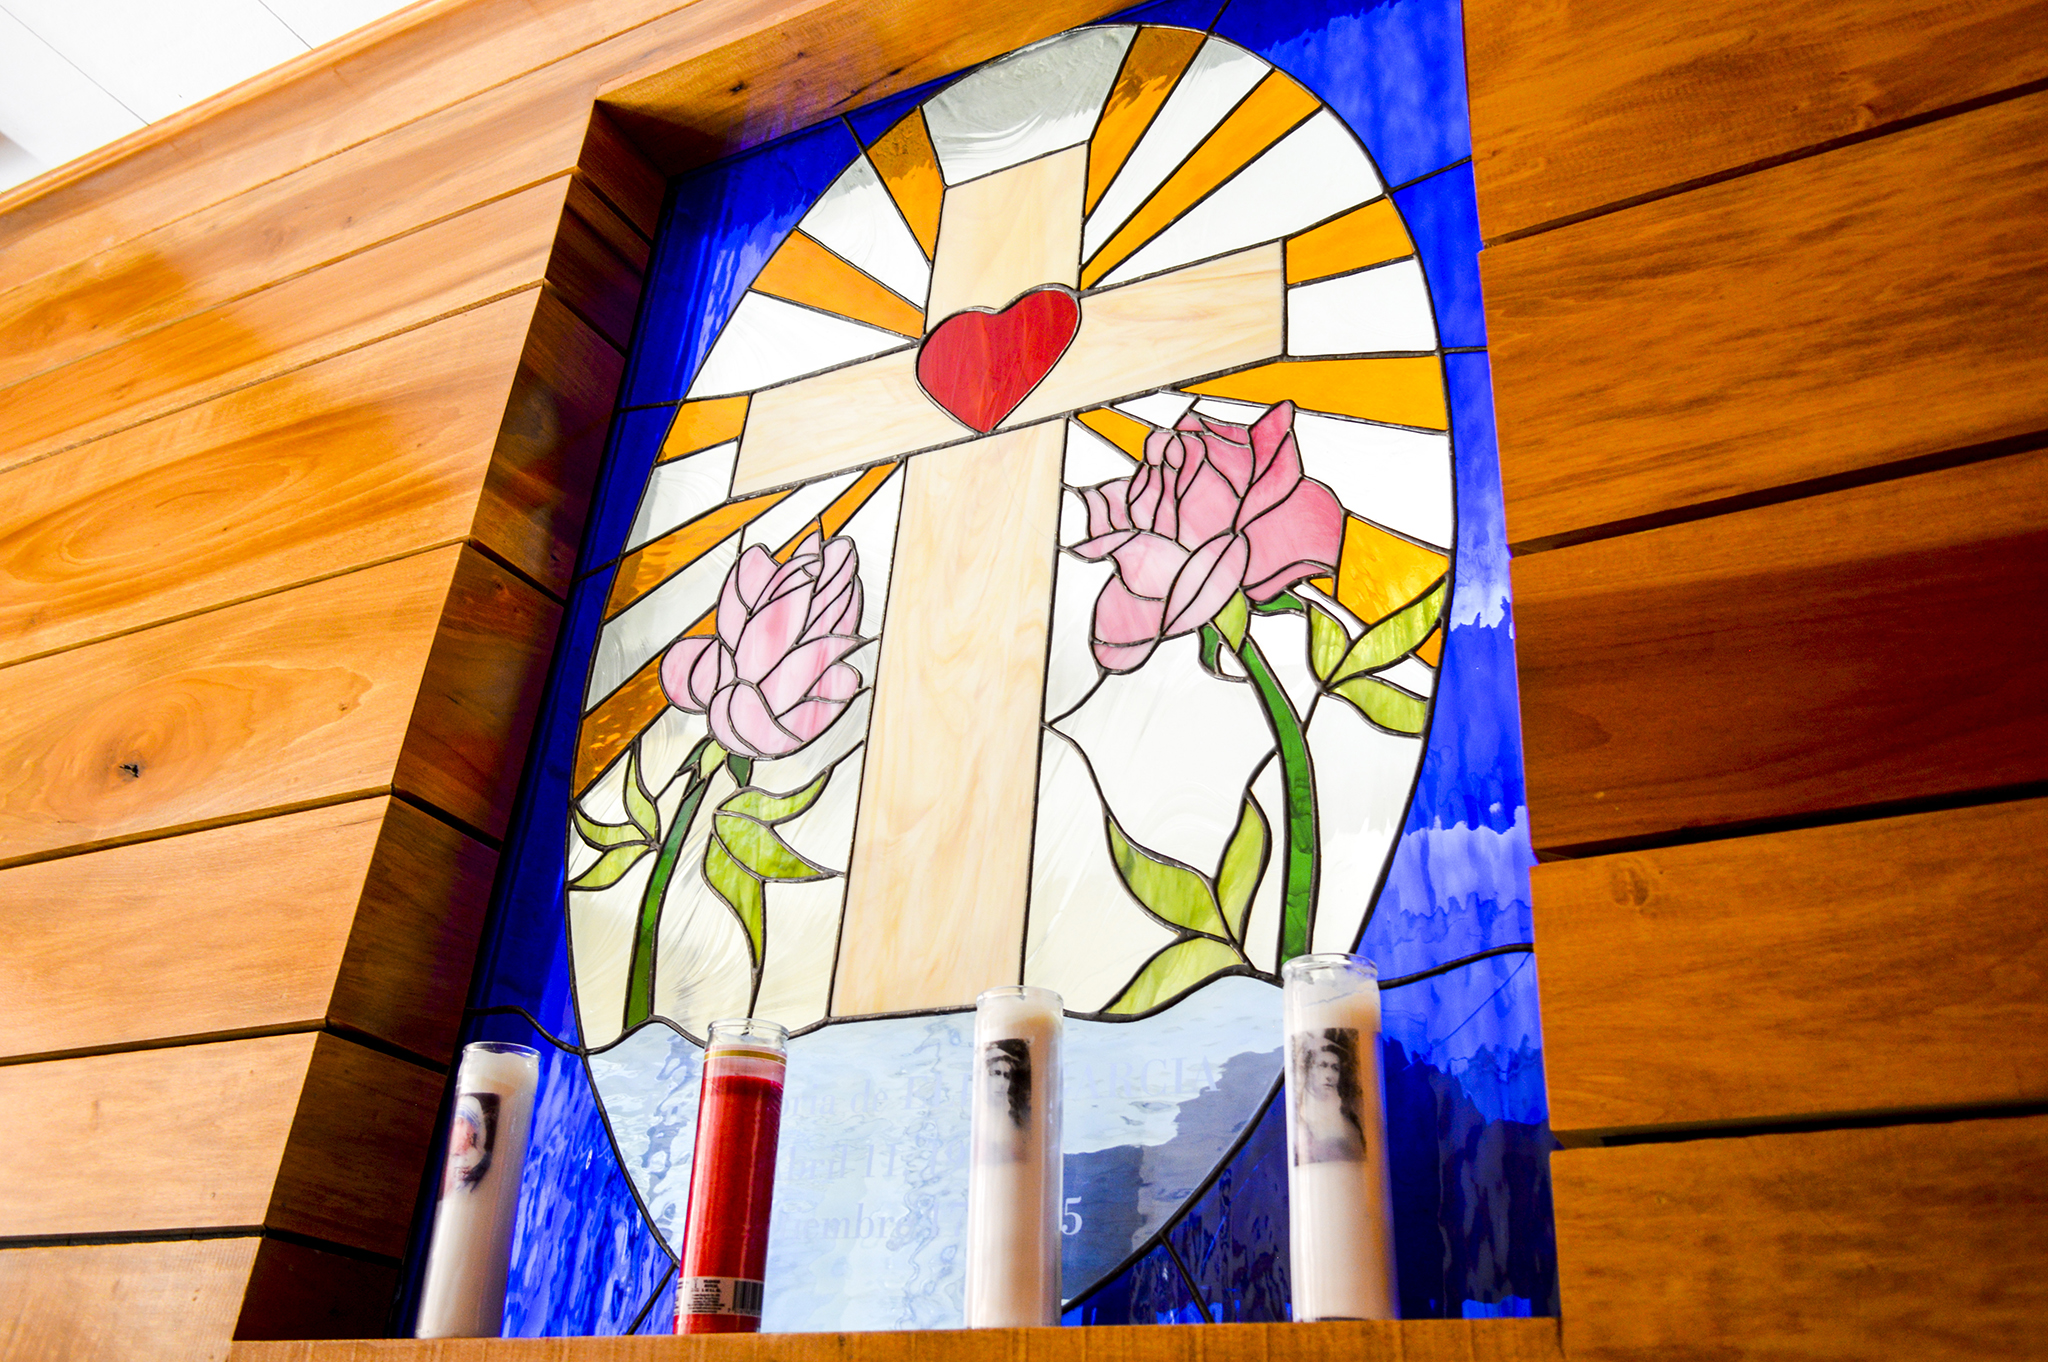 A wood-paneled wall harbors a stained glass mosaic window of a cross. In the middle of the cross is a red heart and two roses are on either side of the cross. Light and dark blue frame the outside of the cross. Candles line the bottom of the cross.